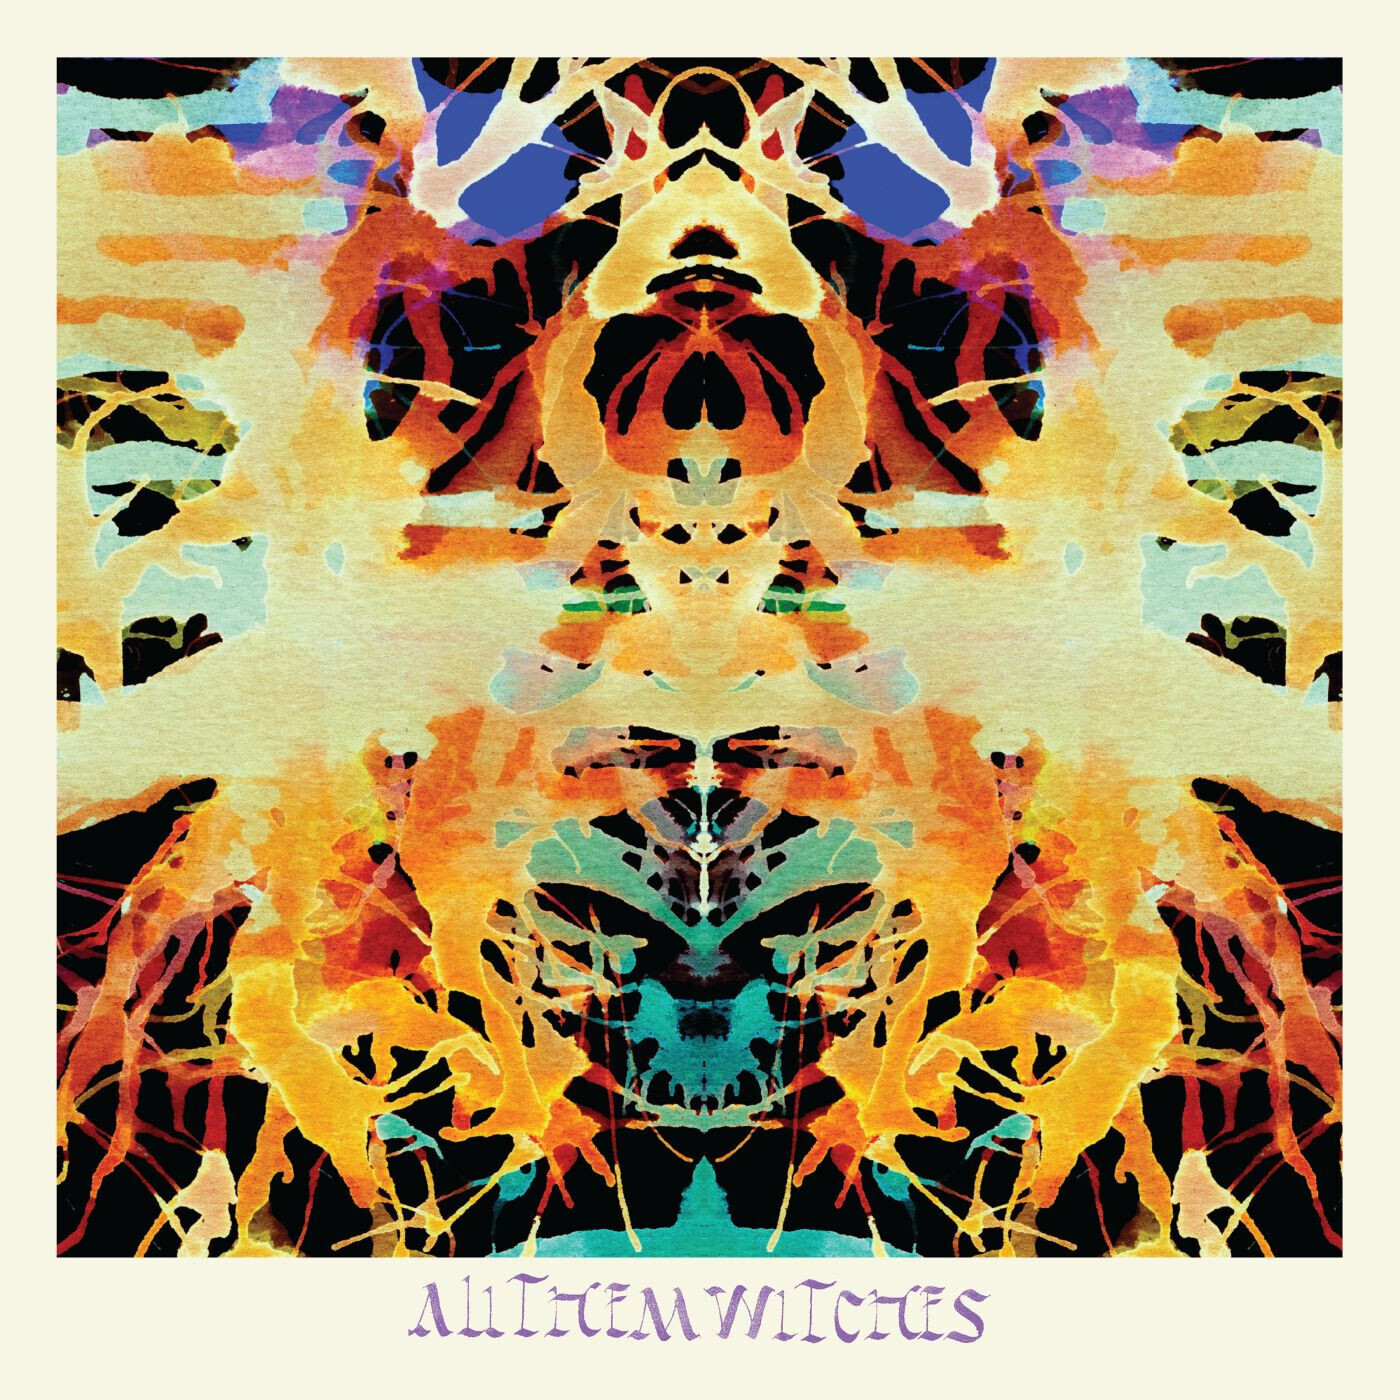 All Them Witches -Sleeping Through the War LP (Deluxe Green Vinyl)